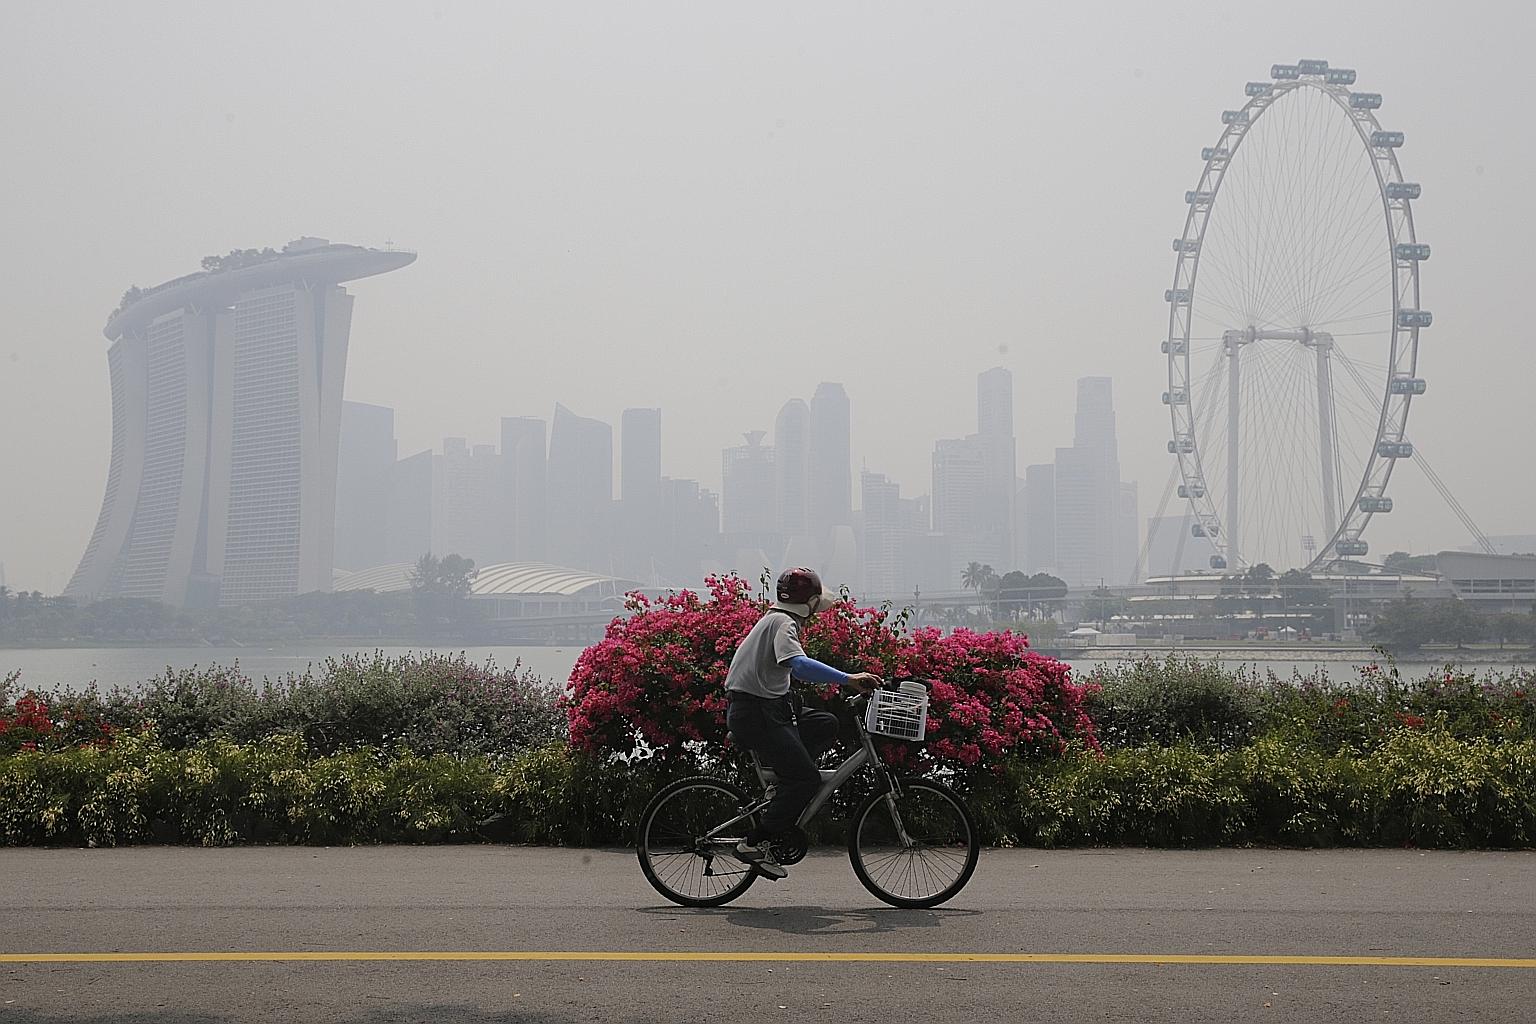 Can S-E Asia be haze-free by 2020?